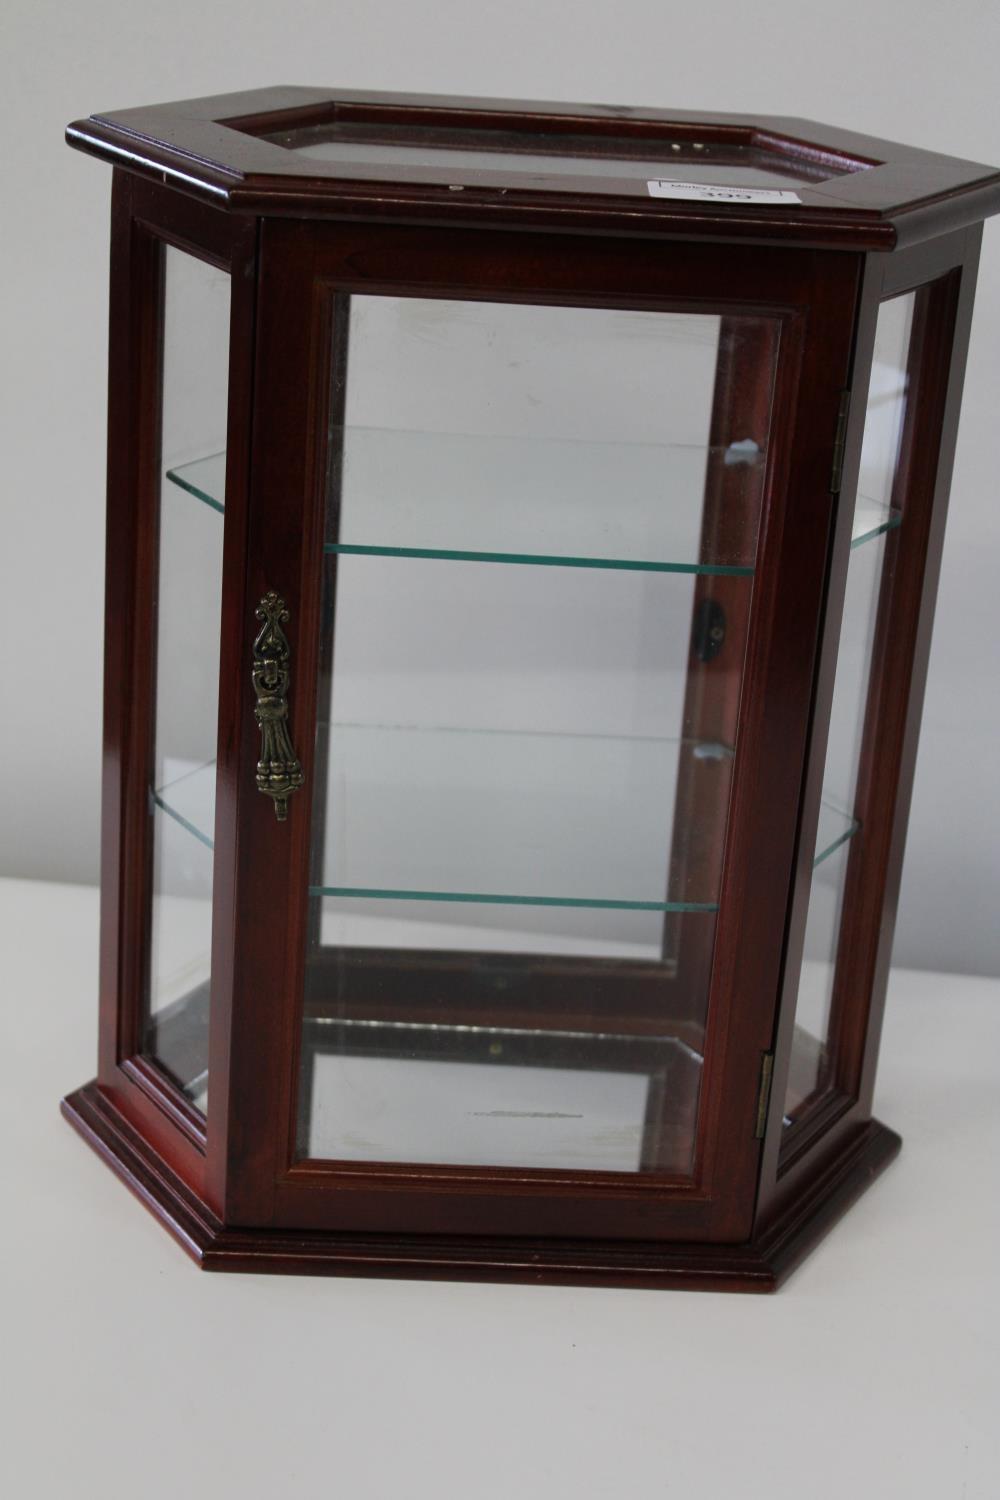 A small wooden jewellery cabinet with glass shelves